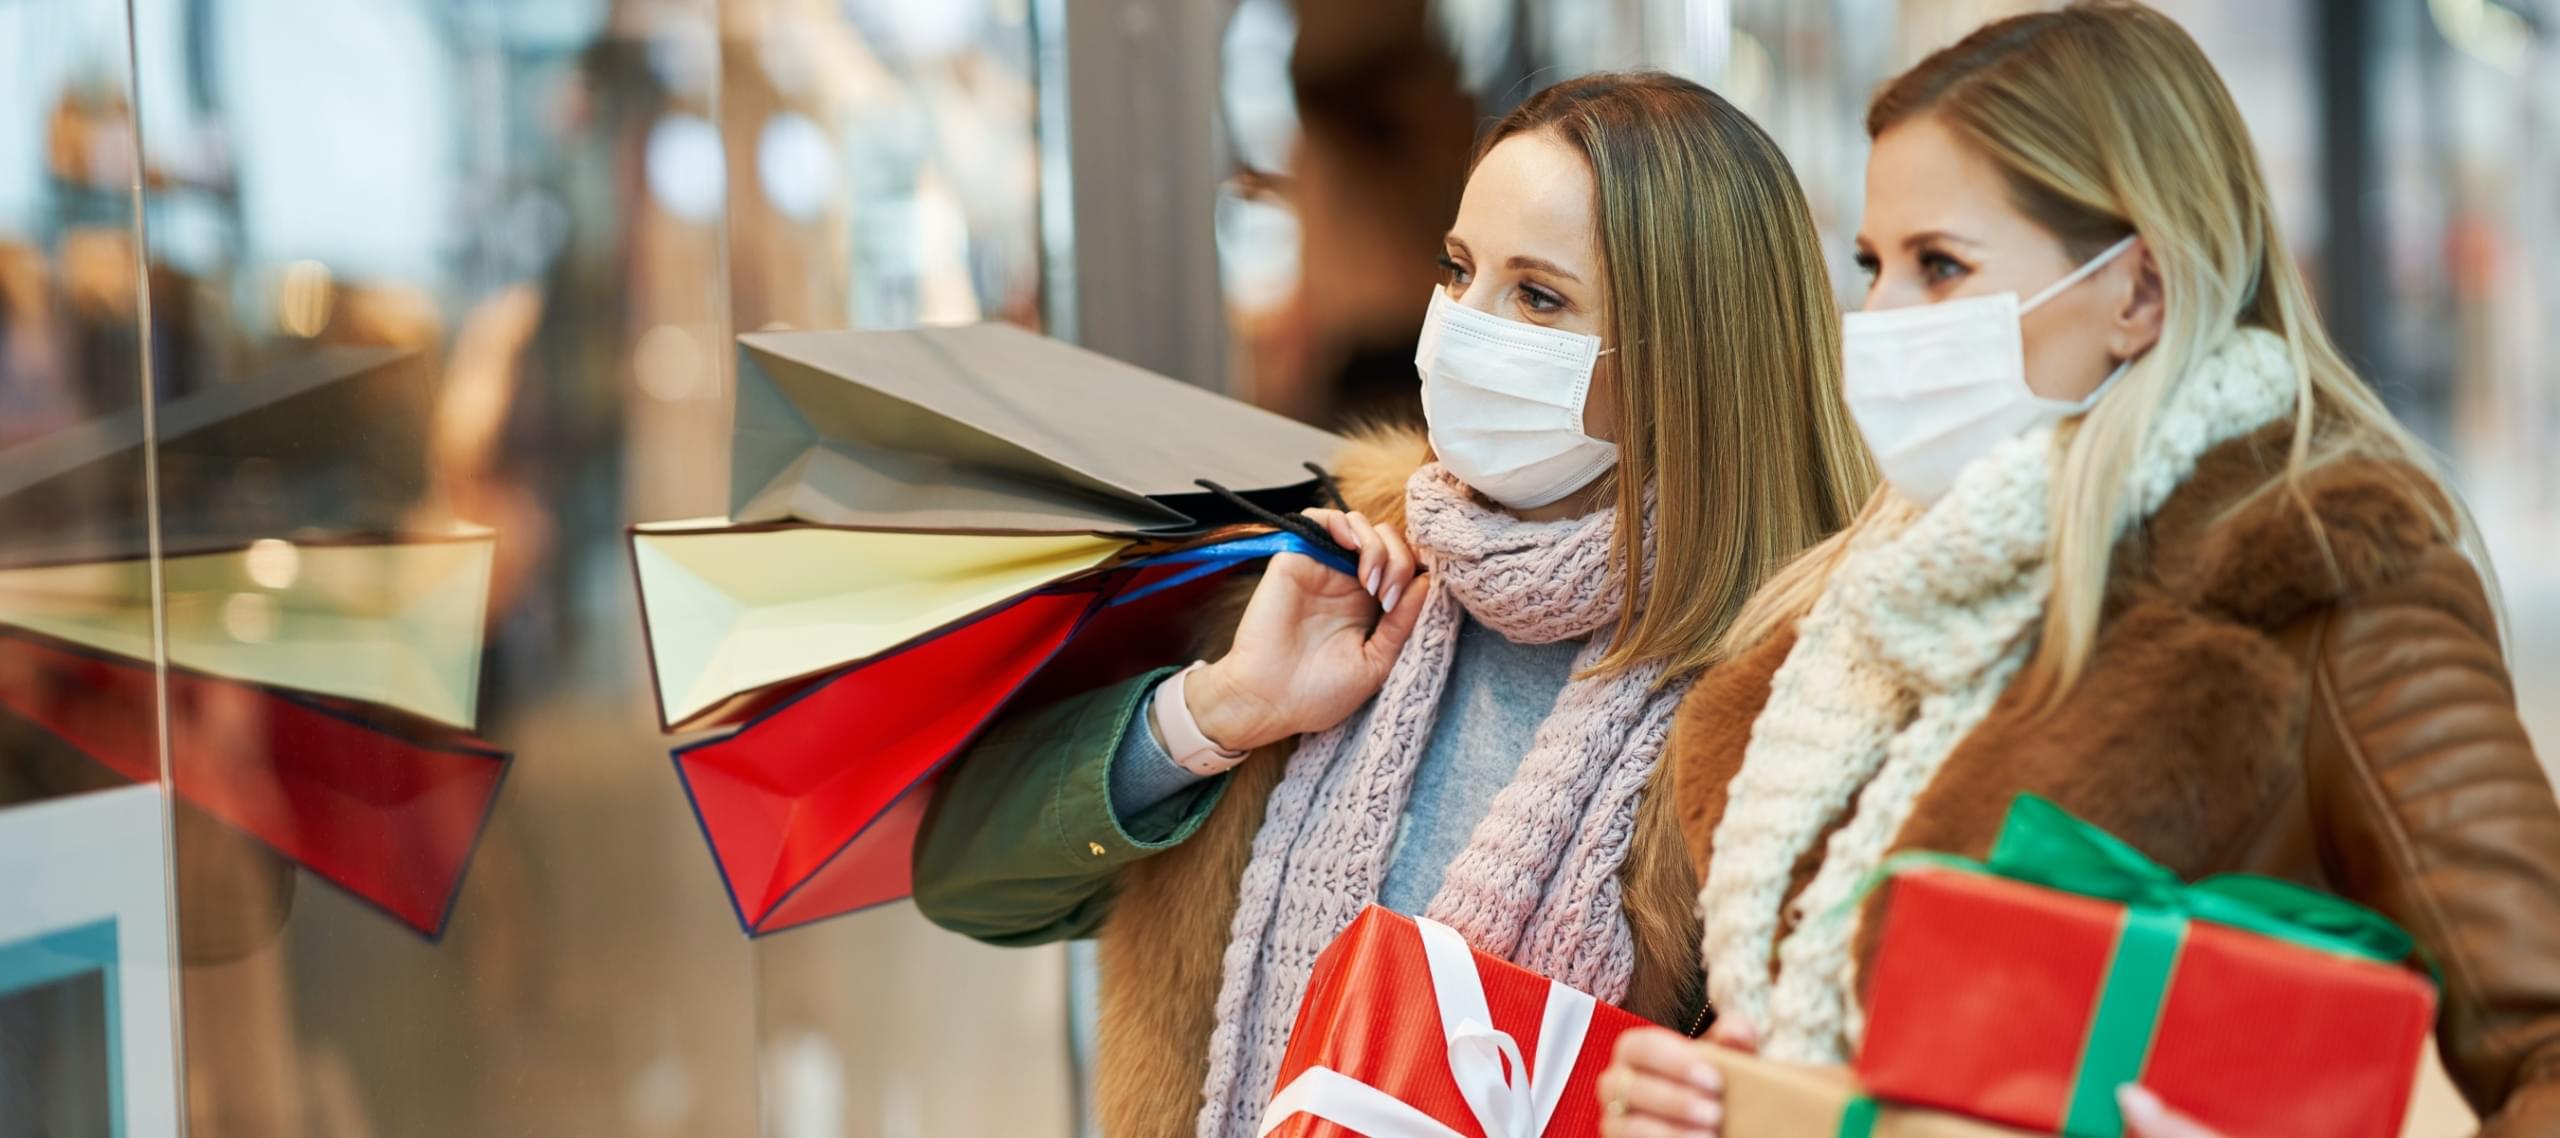 Two women Christmas shopping at a mall during the COVID pandemic